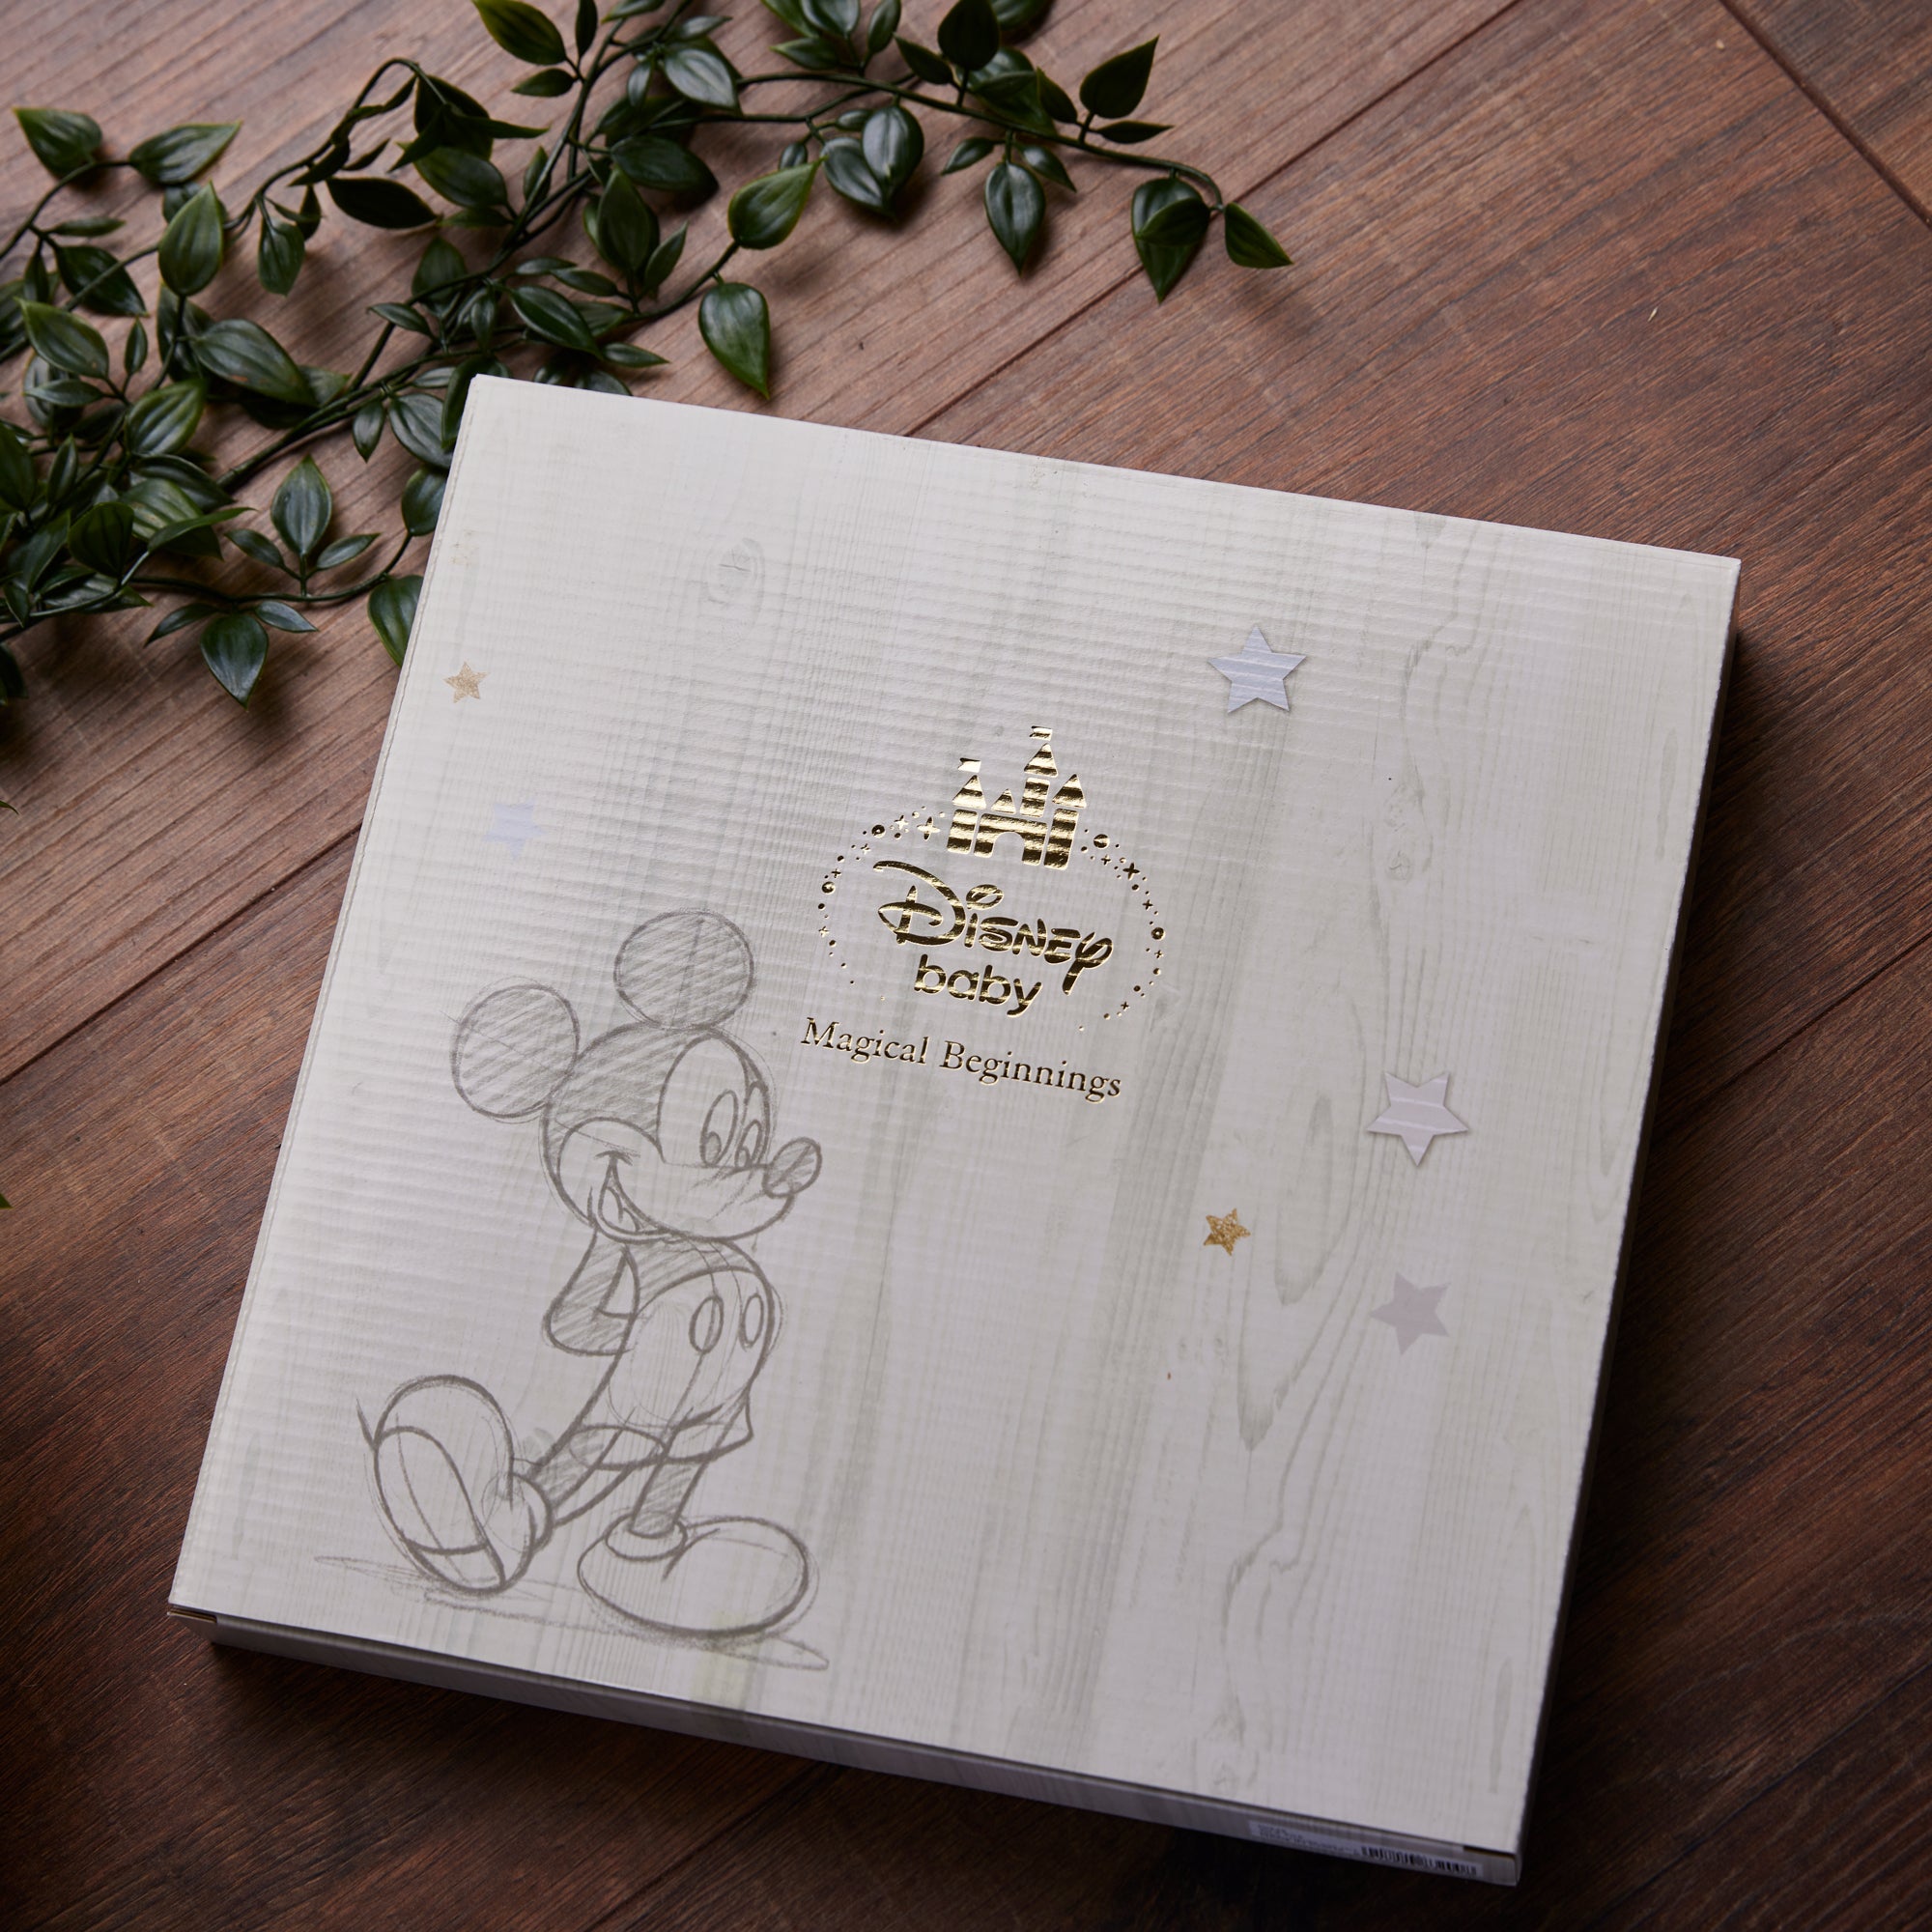 Gift For Minnie Mouse Lover Disney Gifts Important Nana